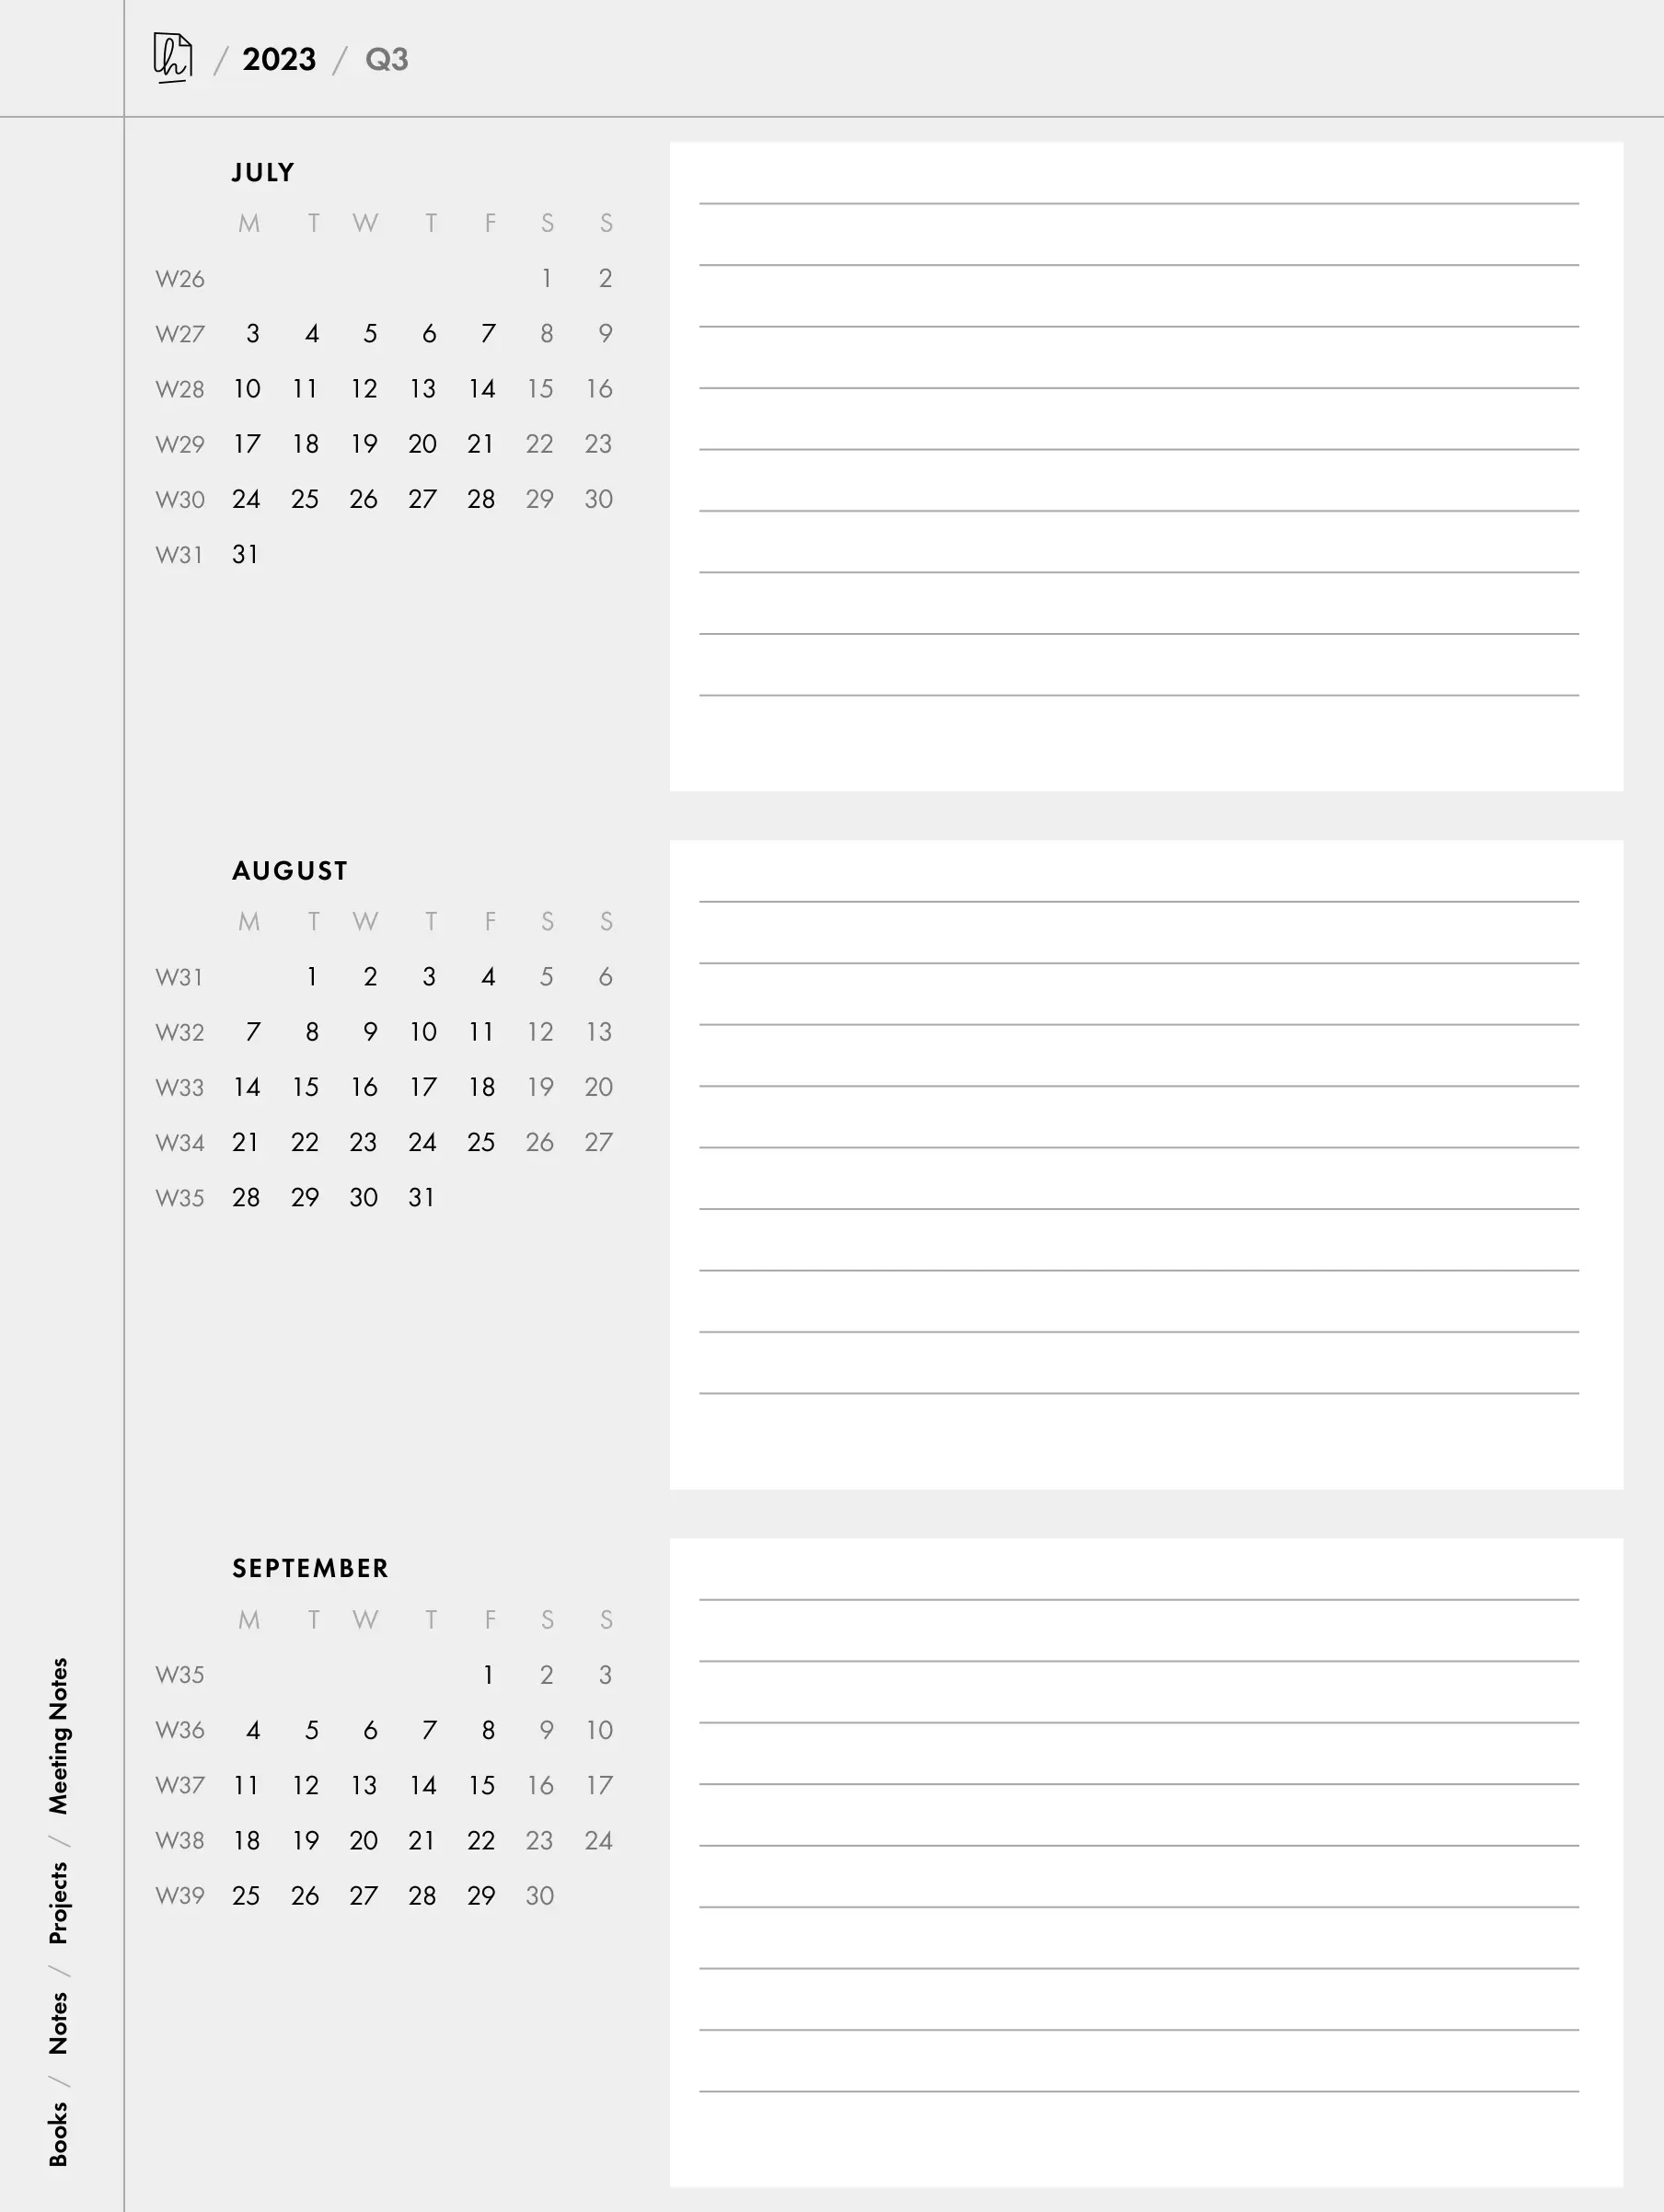 Quarterly Planning (lined or dotted)